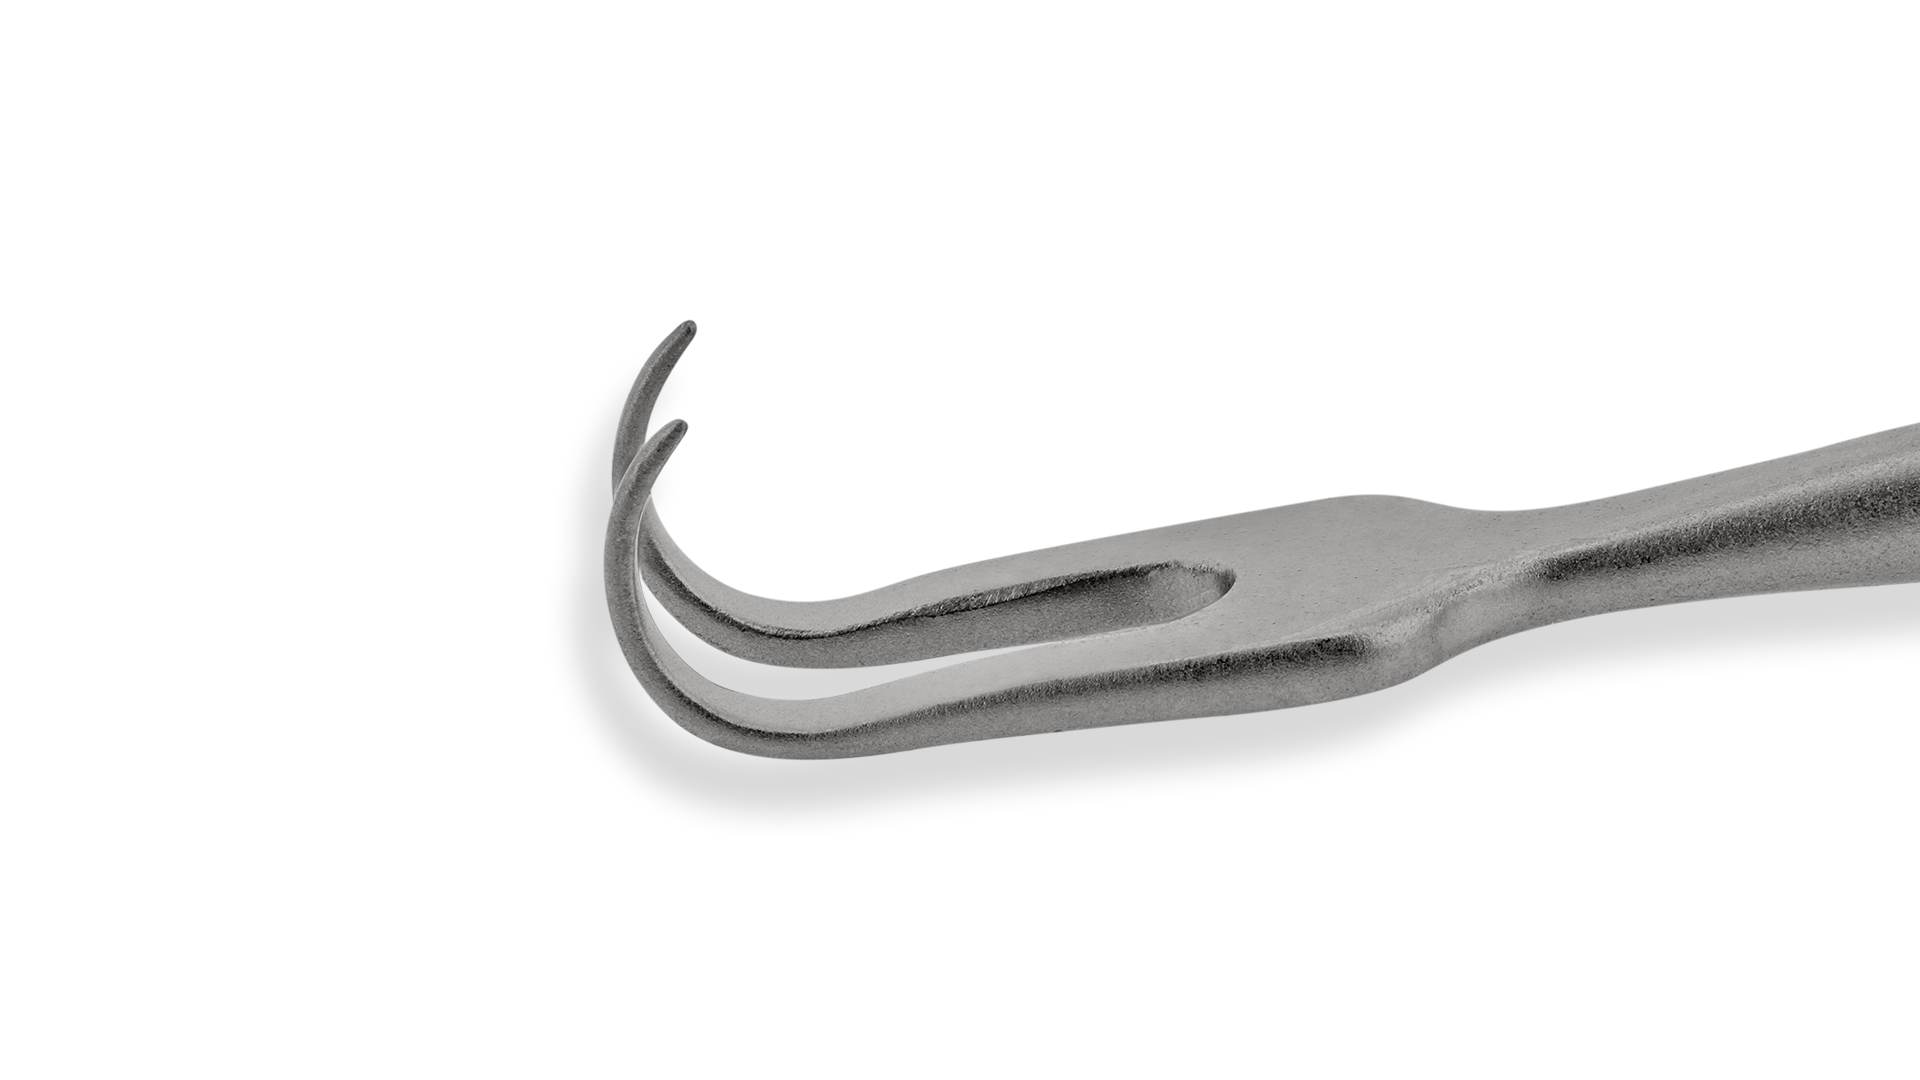 Soft Tissue Hook - Two Sharp prongs